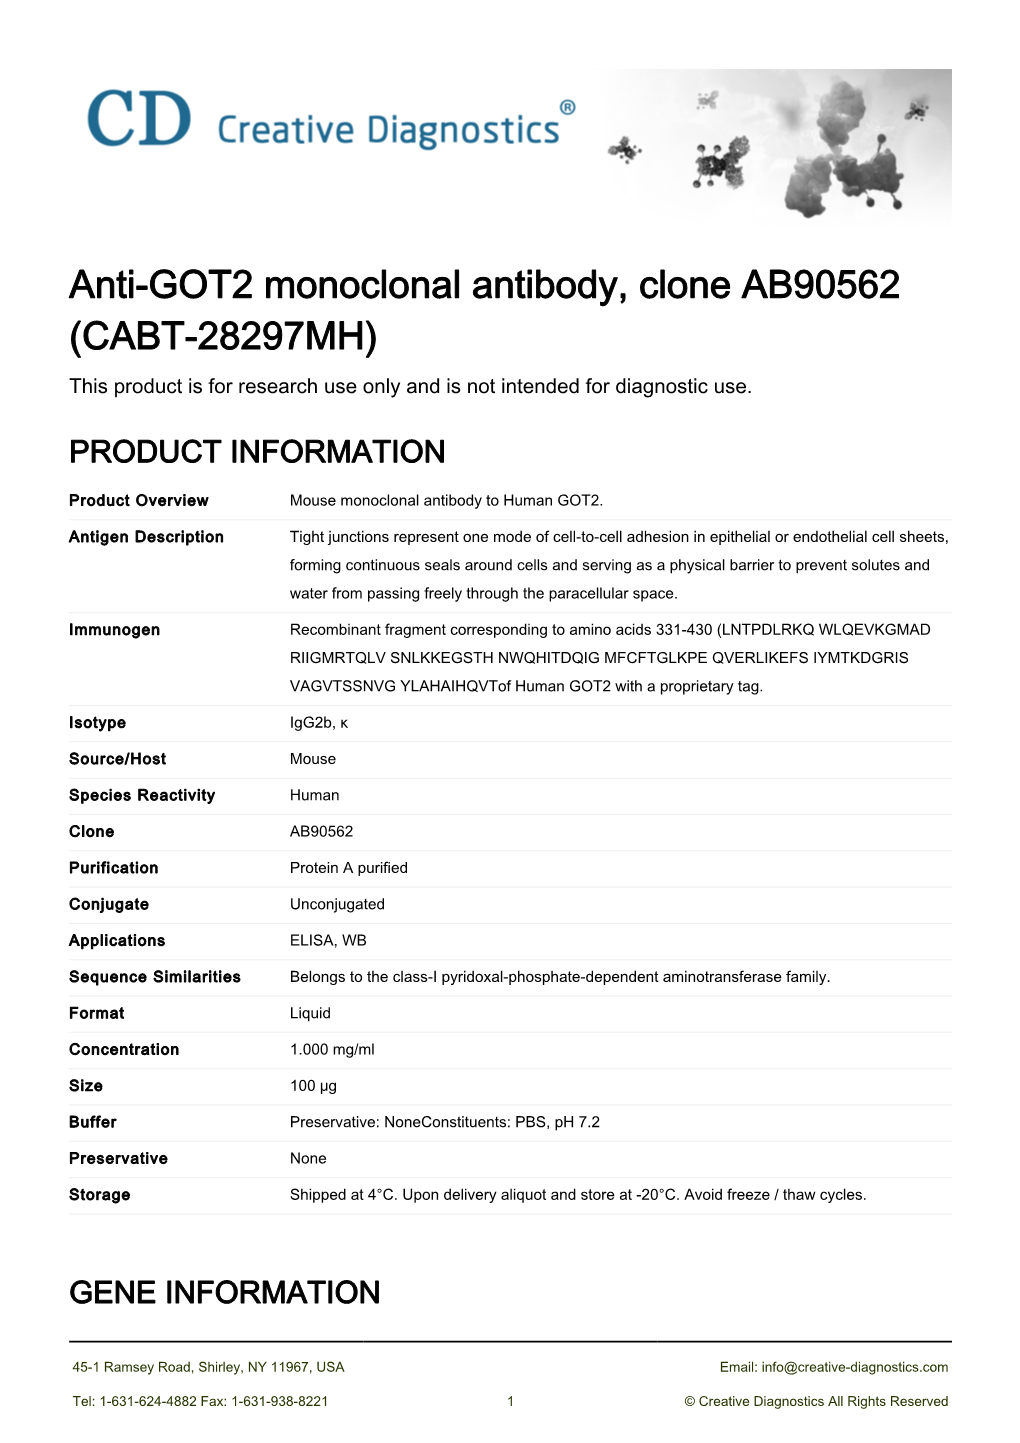 Anti-GOT2 Monoclonal Antibody, Clone AB90562 (CABT-28297MH) This Product Is for Research Use Only and Is Not Intended for Diagnostic Use